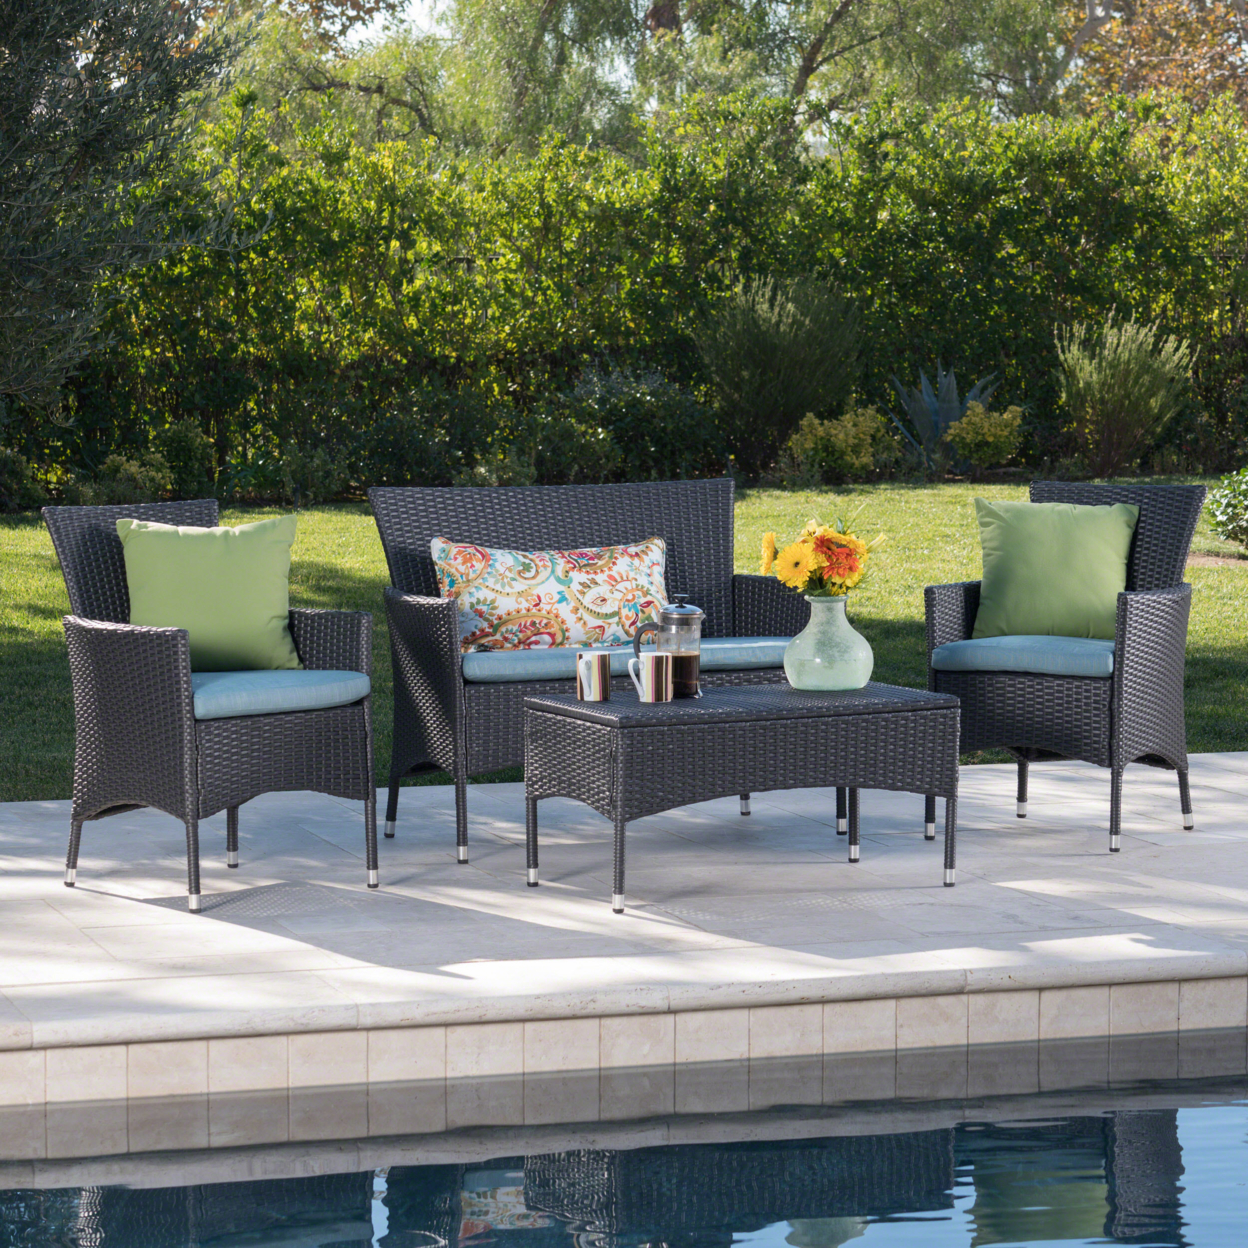 Mina Outdoor 4 Piece Wicker Chat Set With Water Resistant Cushions - Multibrown / Beige